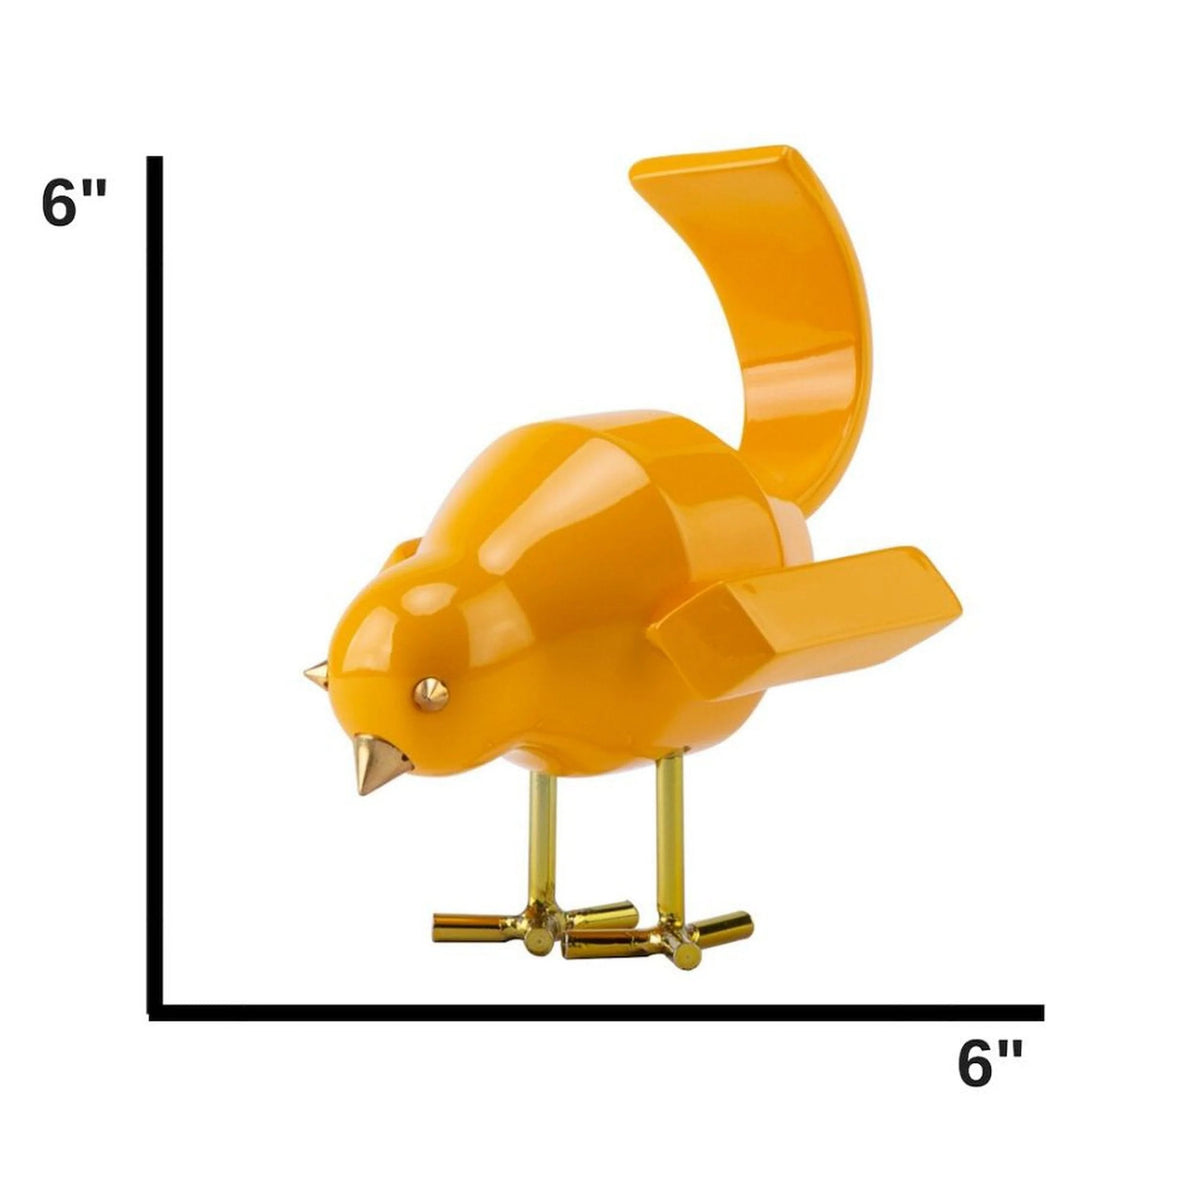 Bird Sculpture in Yellow / Figurines / Decorative Objects